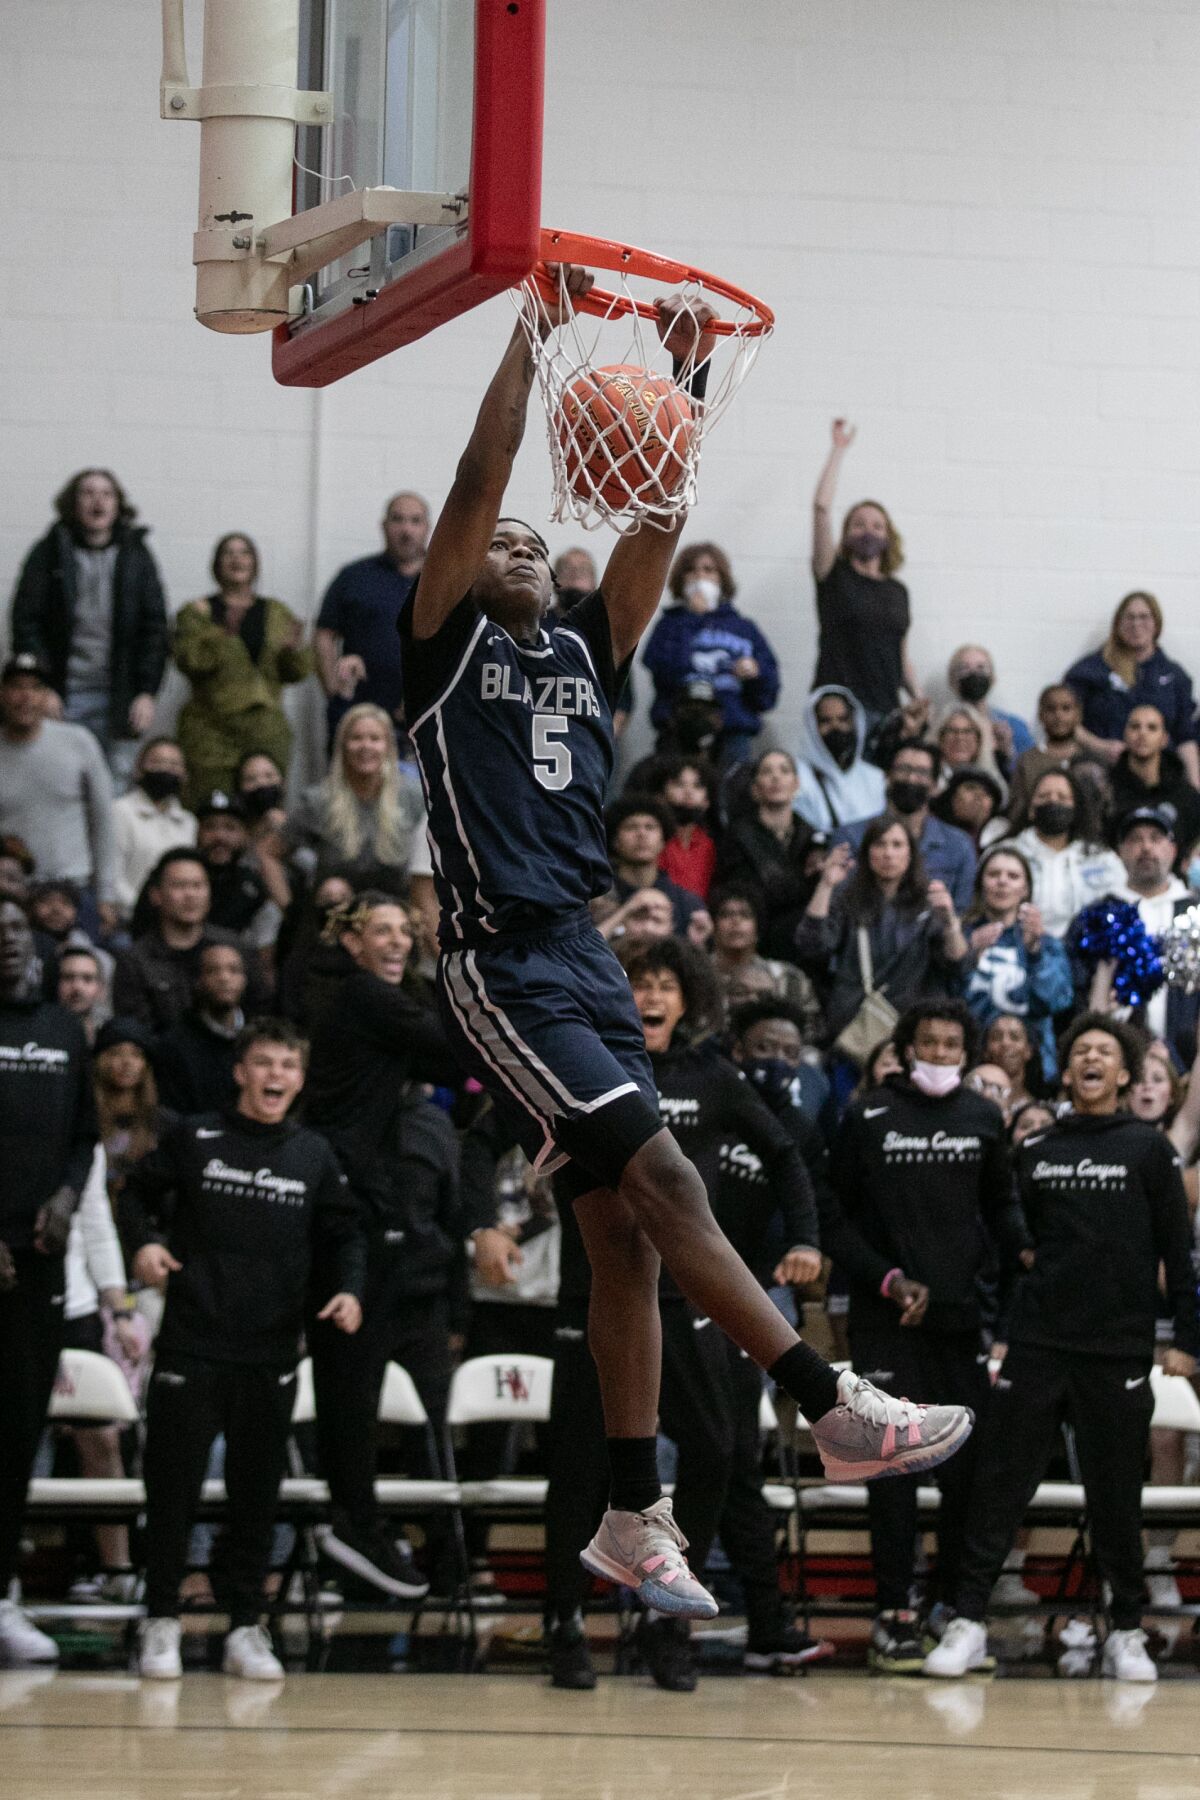 Sierra Canyon's Mike Price, who had 15 points, dunks against Harvard-Westlake.